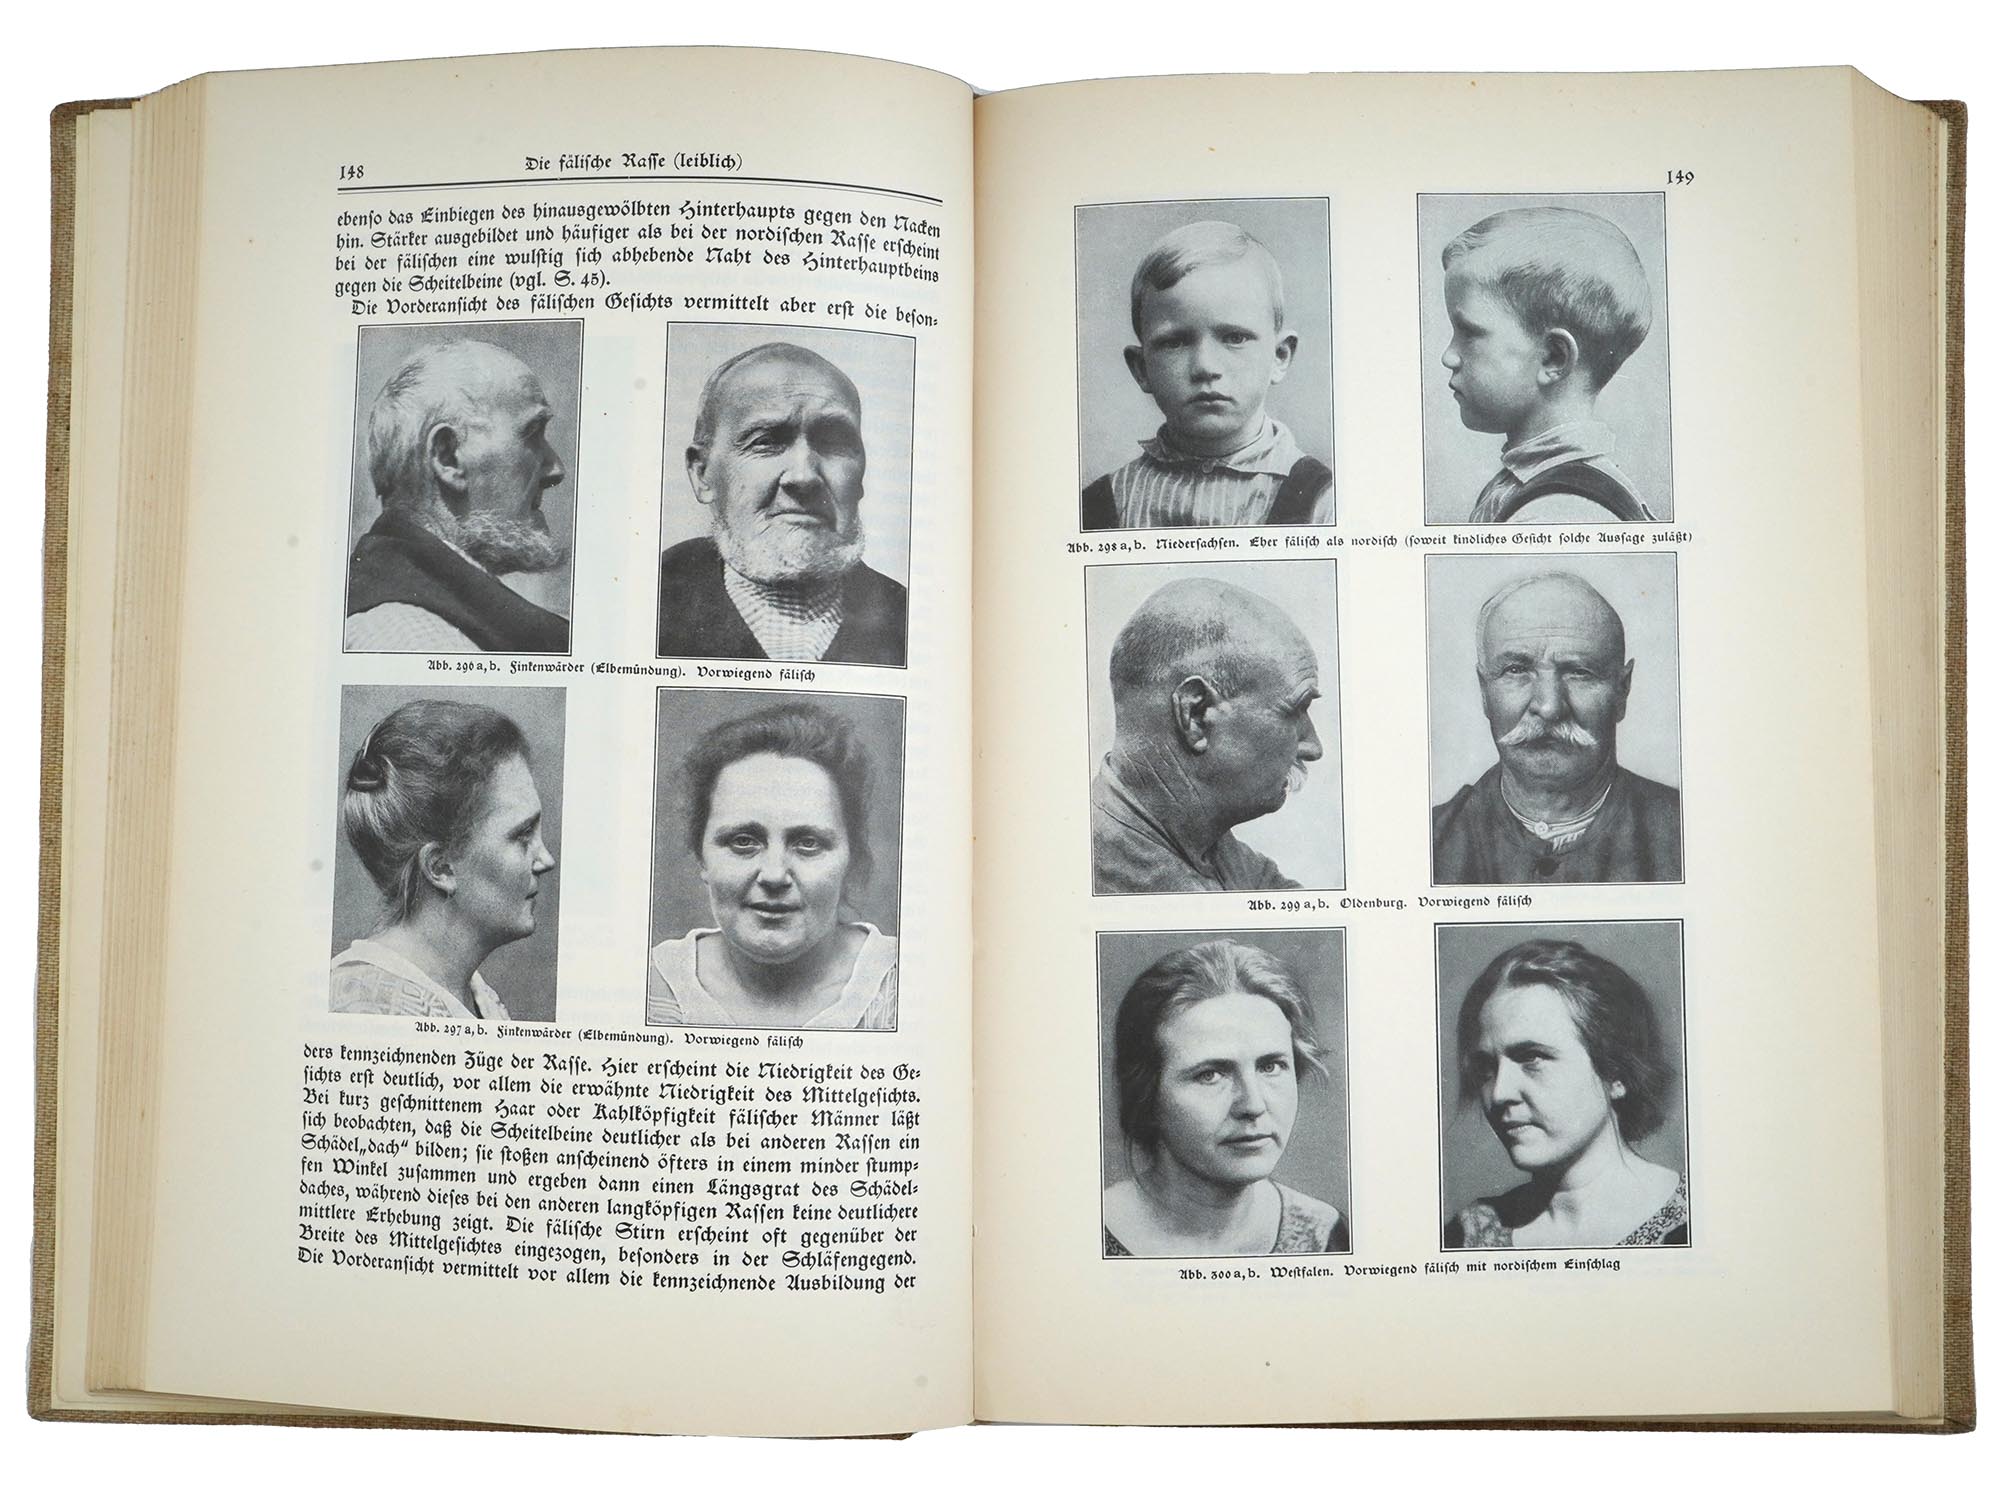 RACIAL SUBJECT BOOK FROM ADOLF HITLERS LIBRARY PIC-6